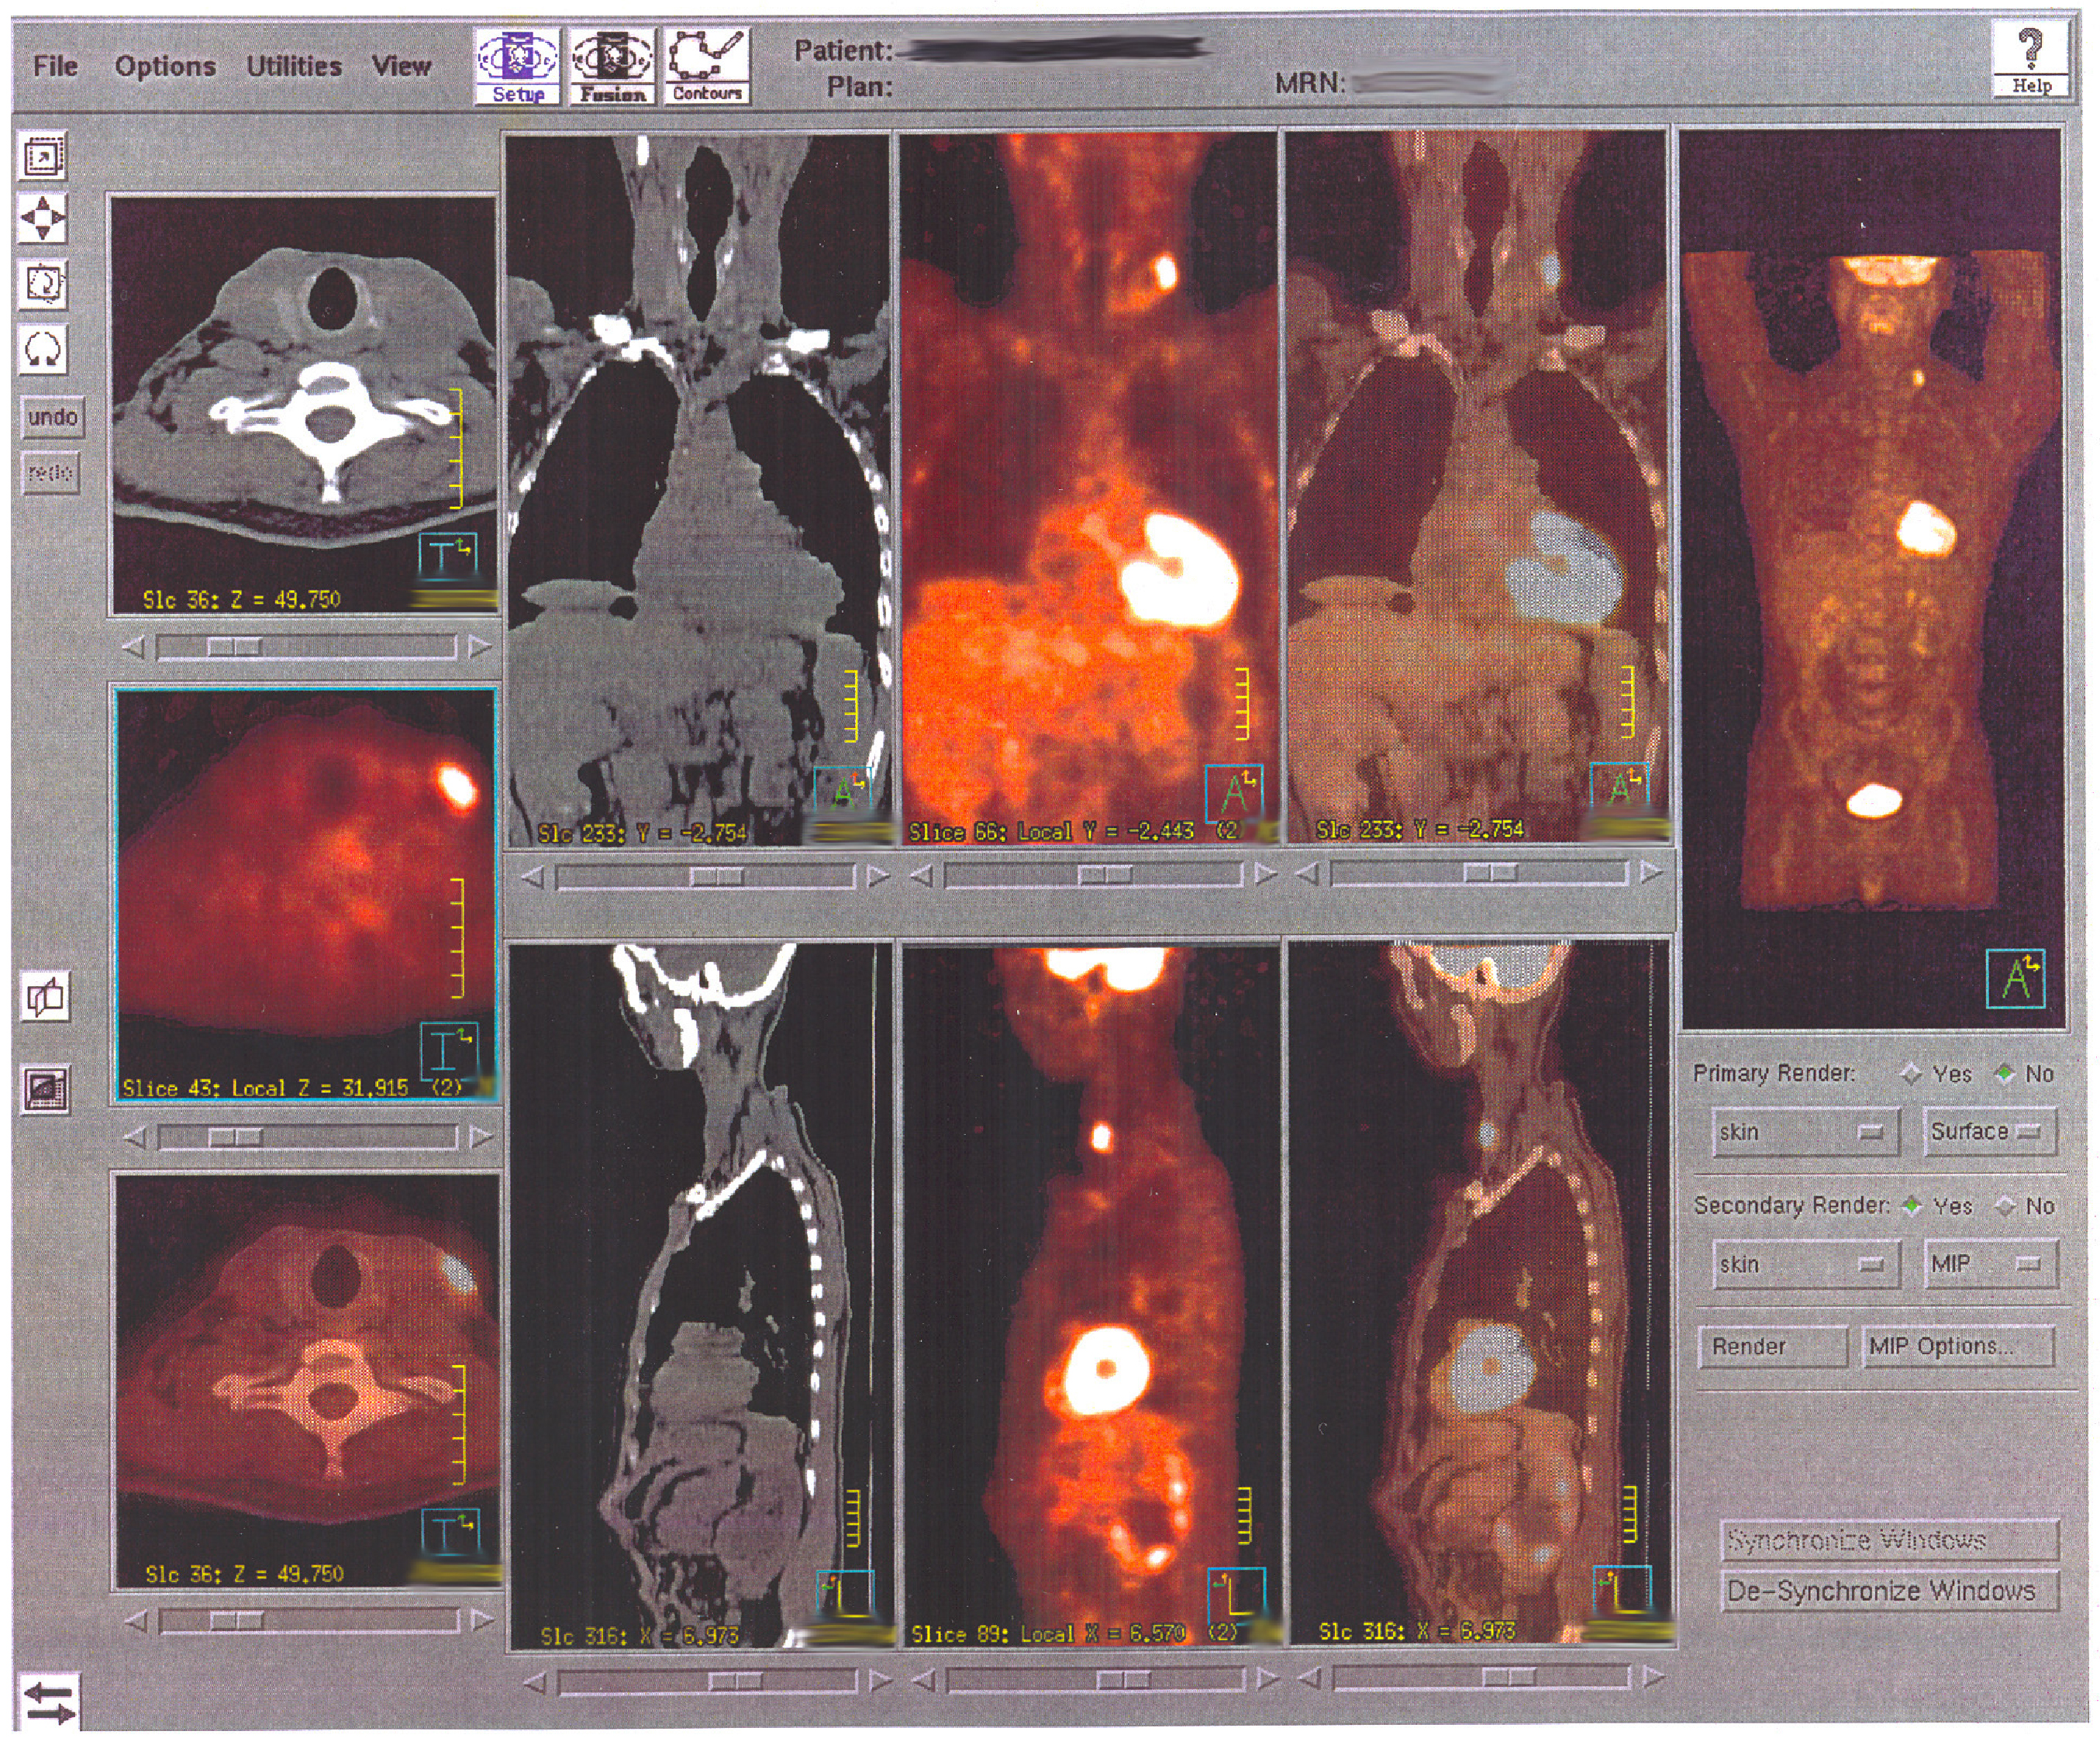 This figure shows multiple images from a PET scan.